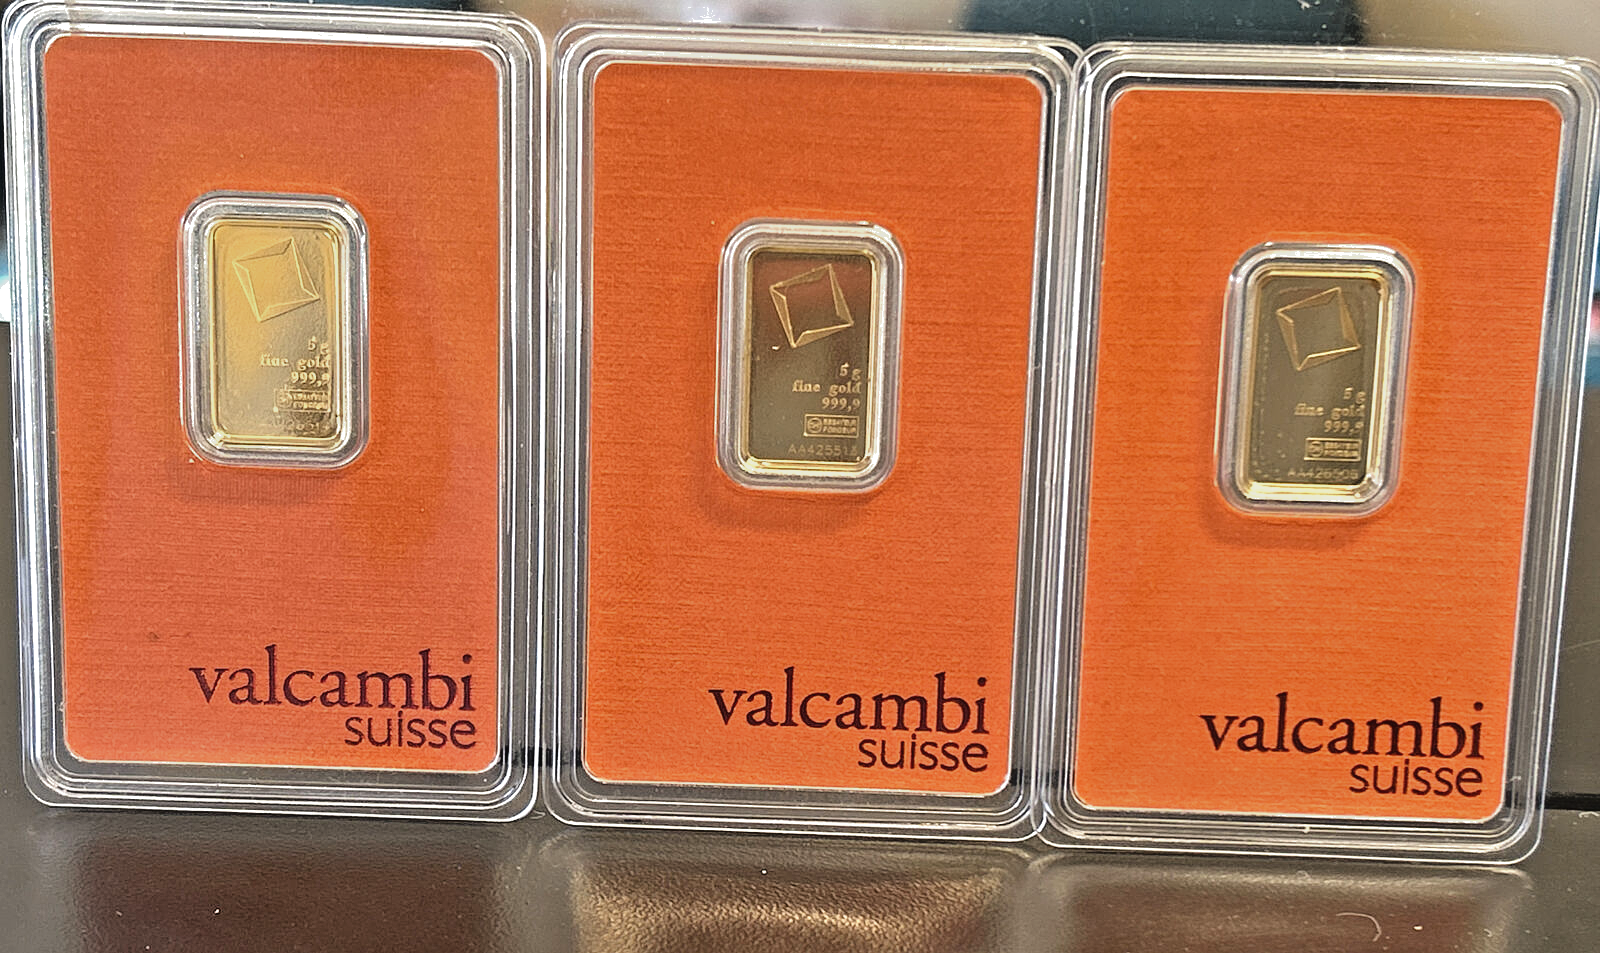 3 Valcambi Suisse 5 Gram Gold Bars 999.9 - Sealed w Assay & Serial Numbers